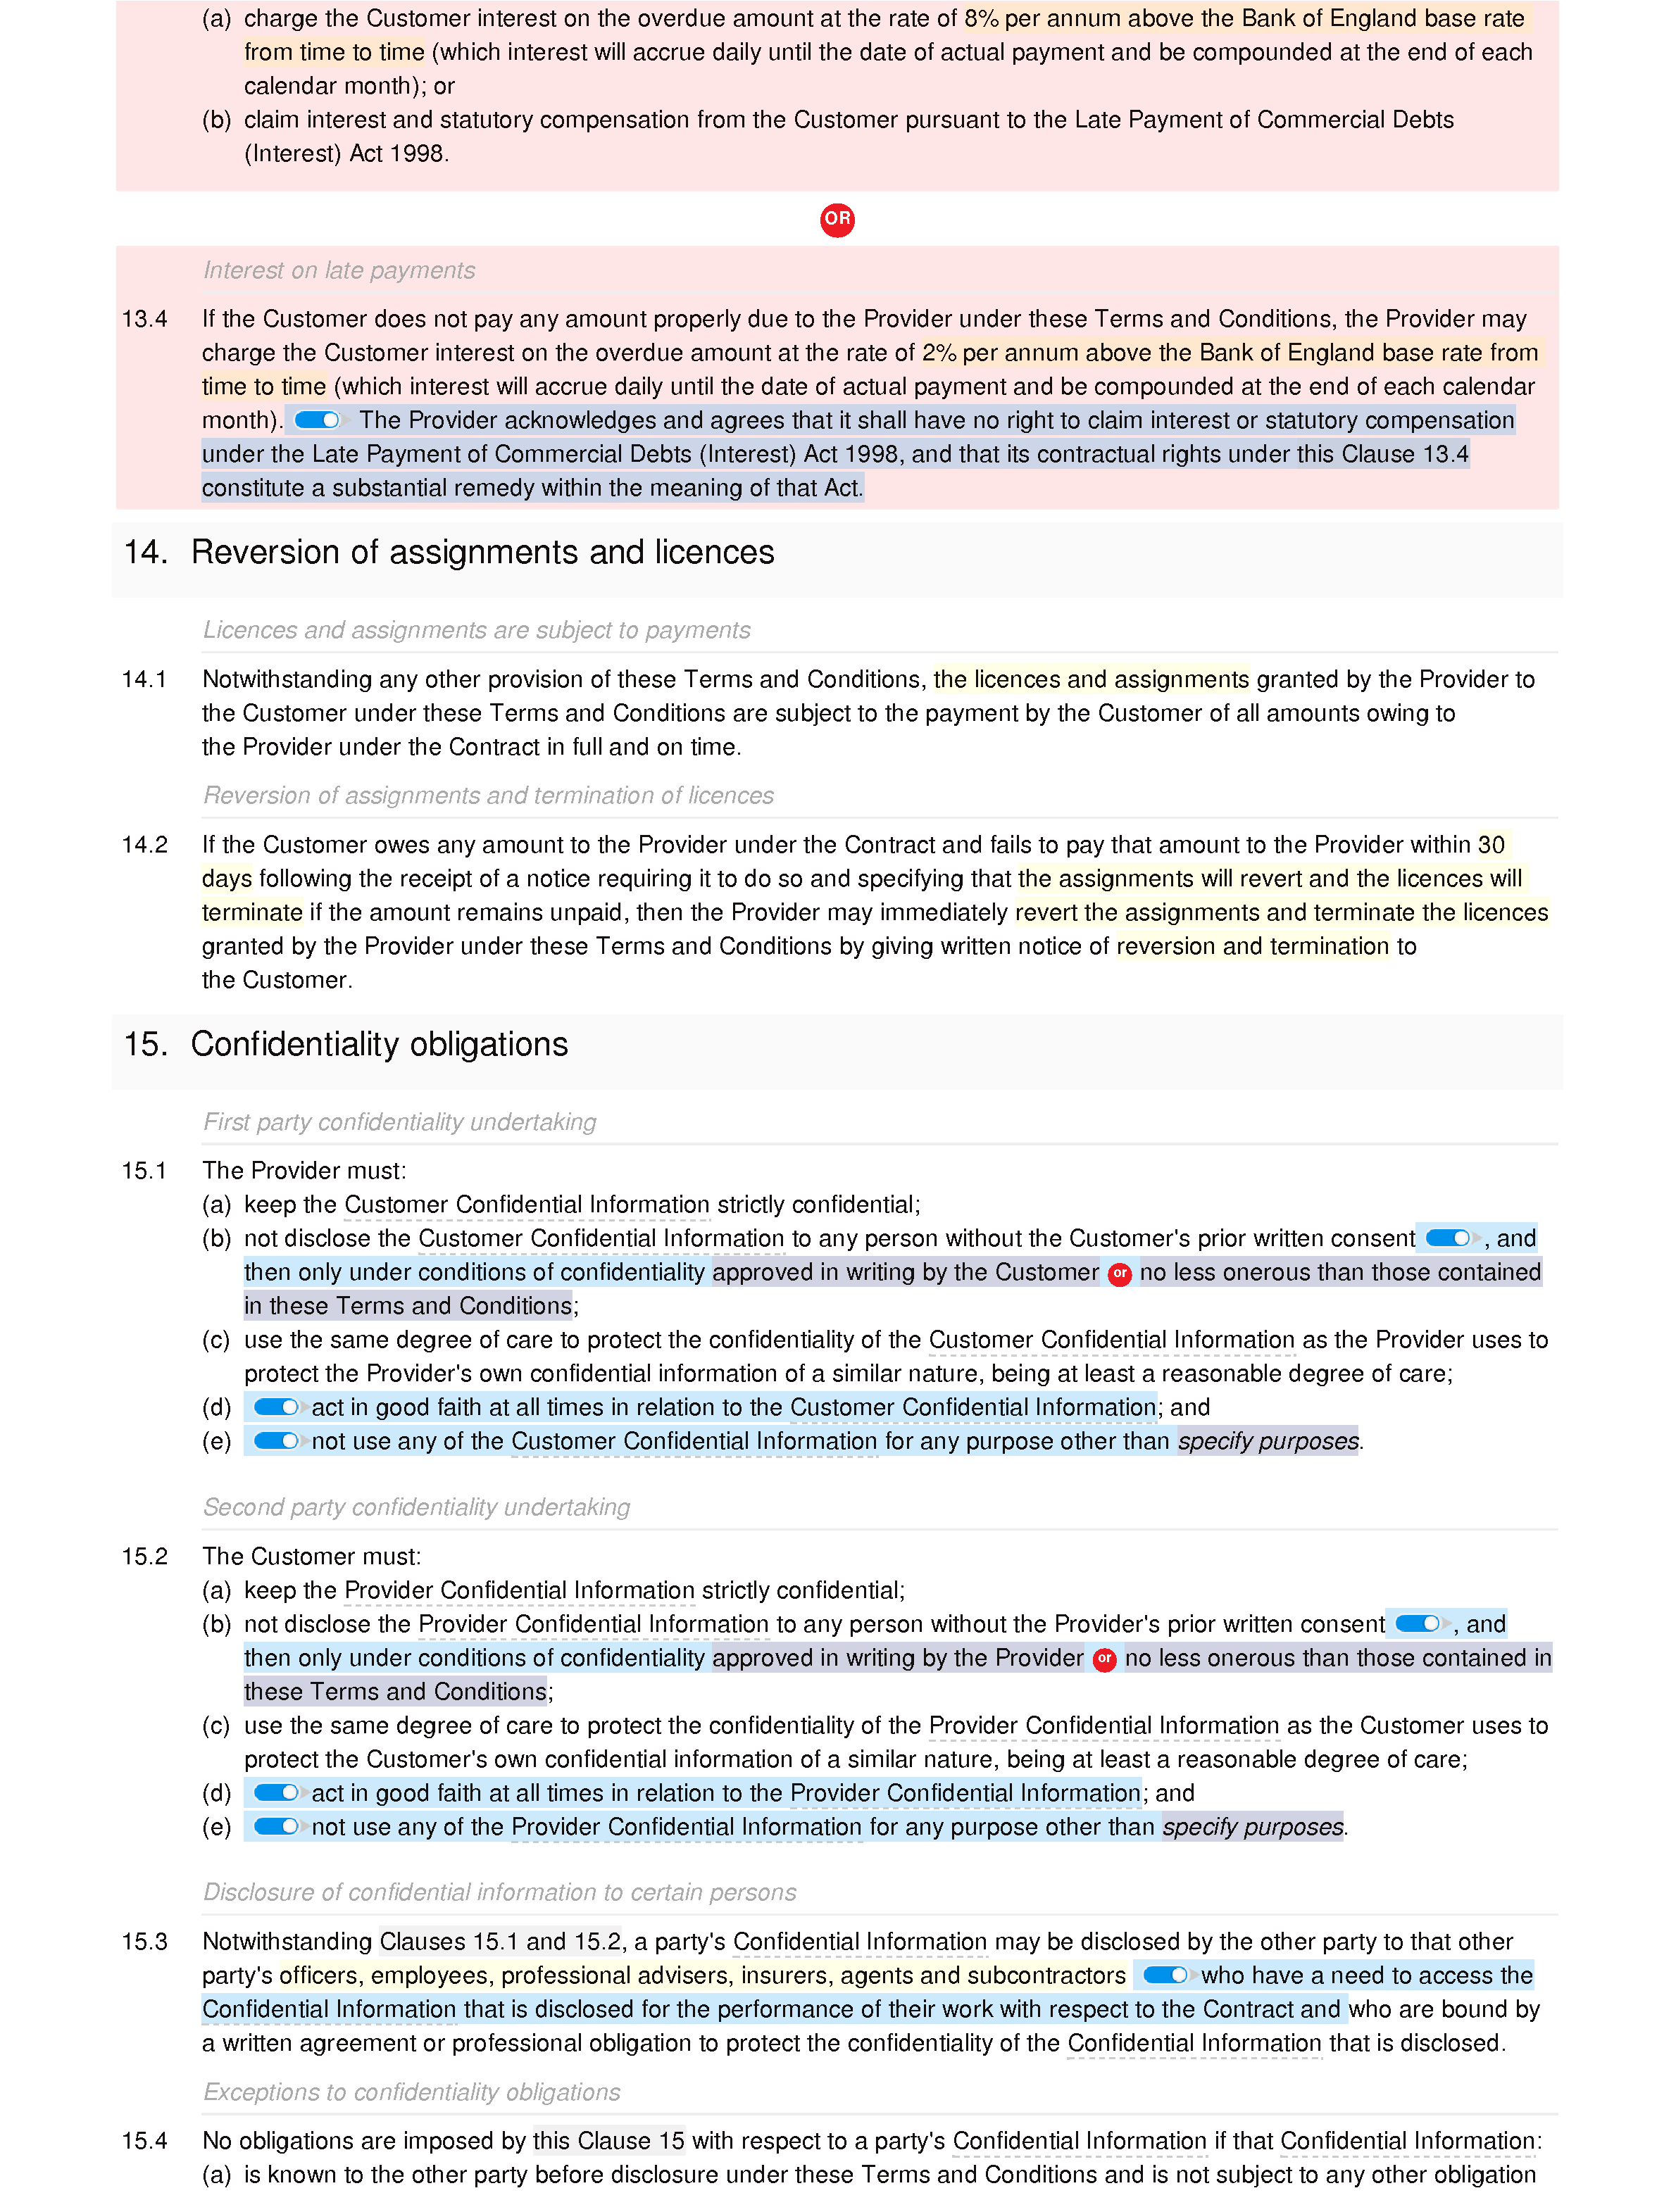 Web services terms and conditions document editor preview